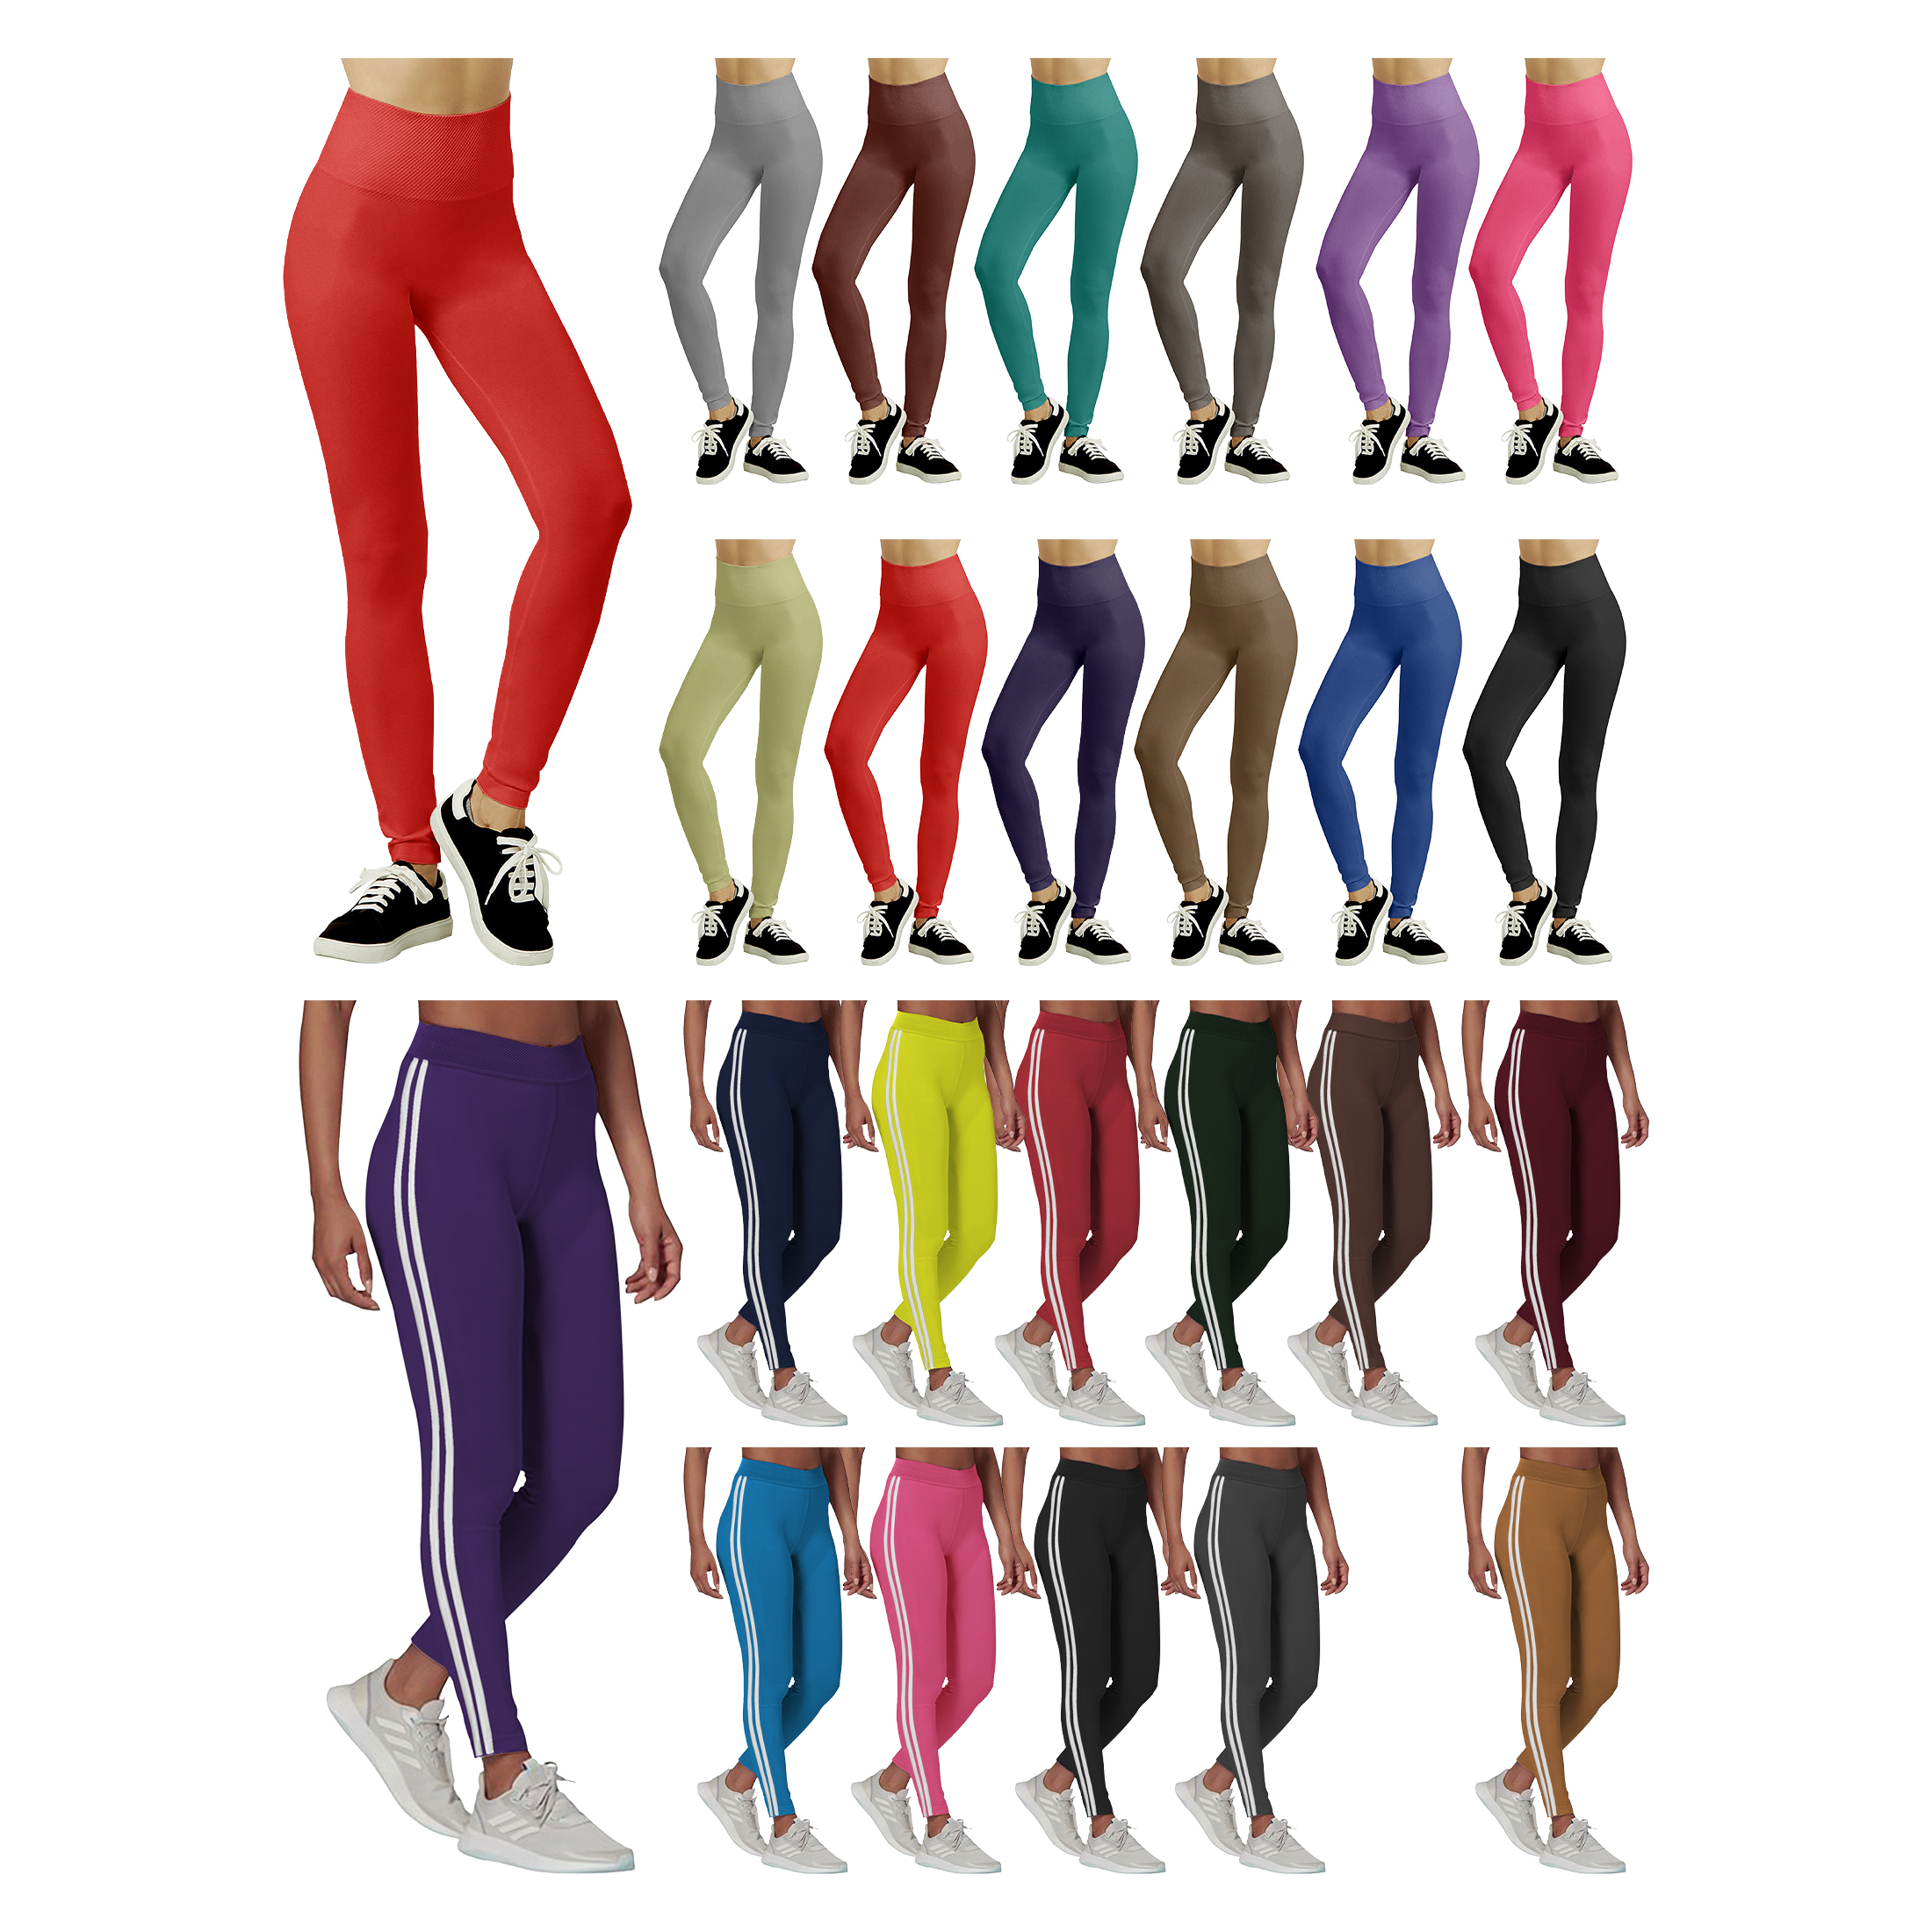 2-Pack: Women's Fleece-Lined High Waisted Workout Yoga Leggings - Solid, Large/X-Large